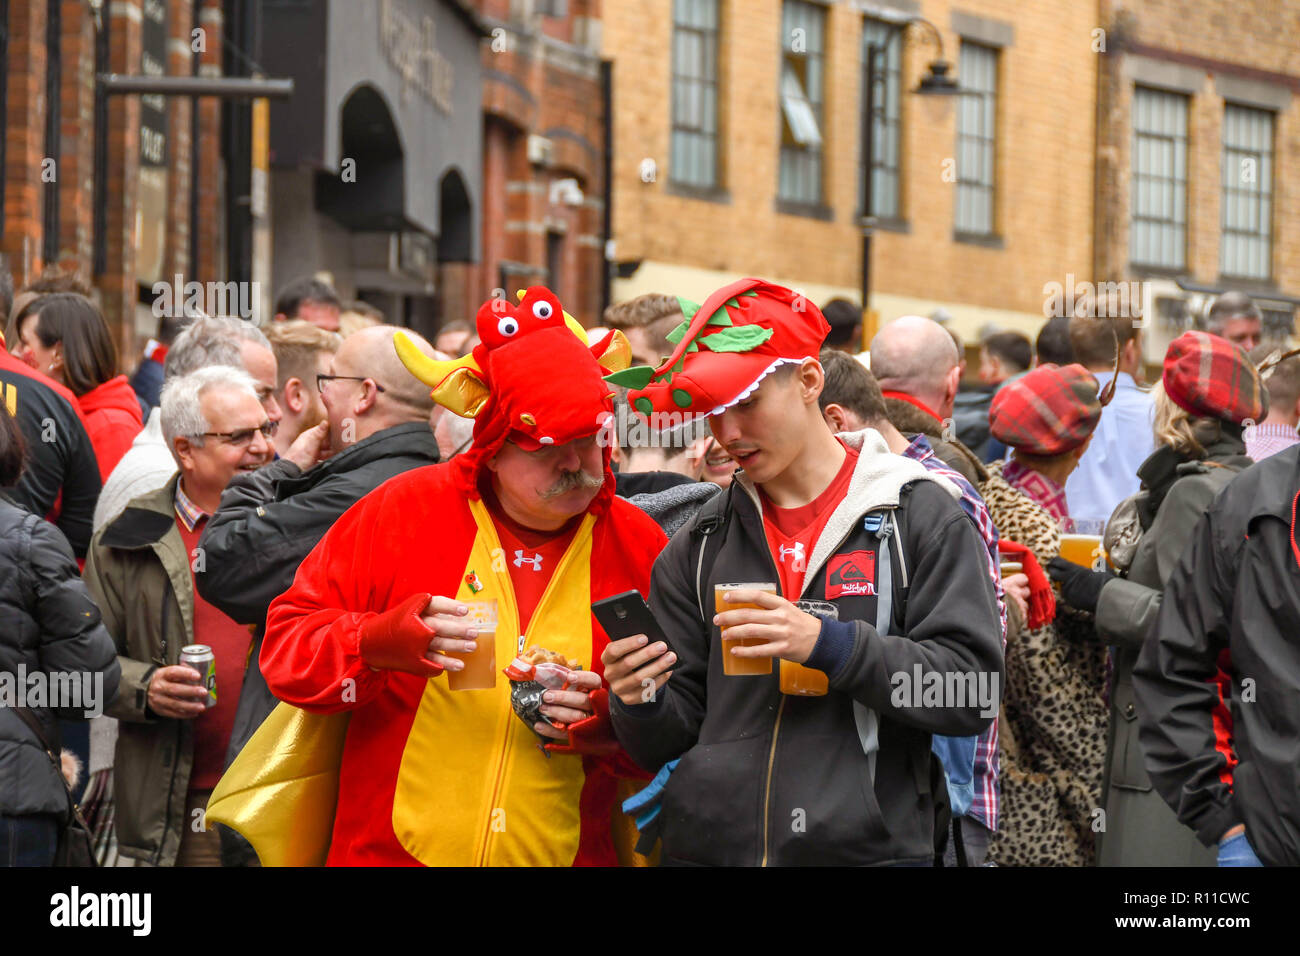 CARDIFF, WALES - NOVEMBER 2018: Two Welsh rugby supporters drinking and talking in a crowd outside a pub in Cardiff city centre before a match Stock Photo